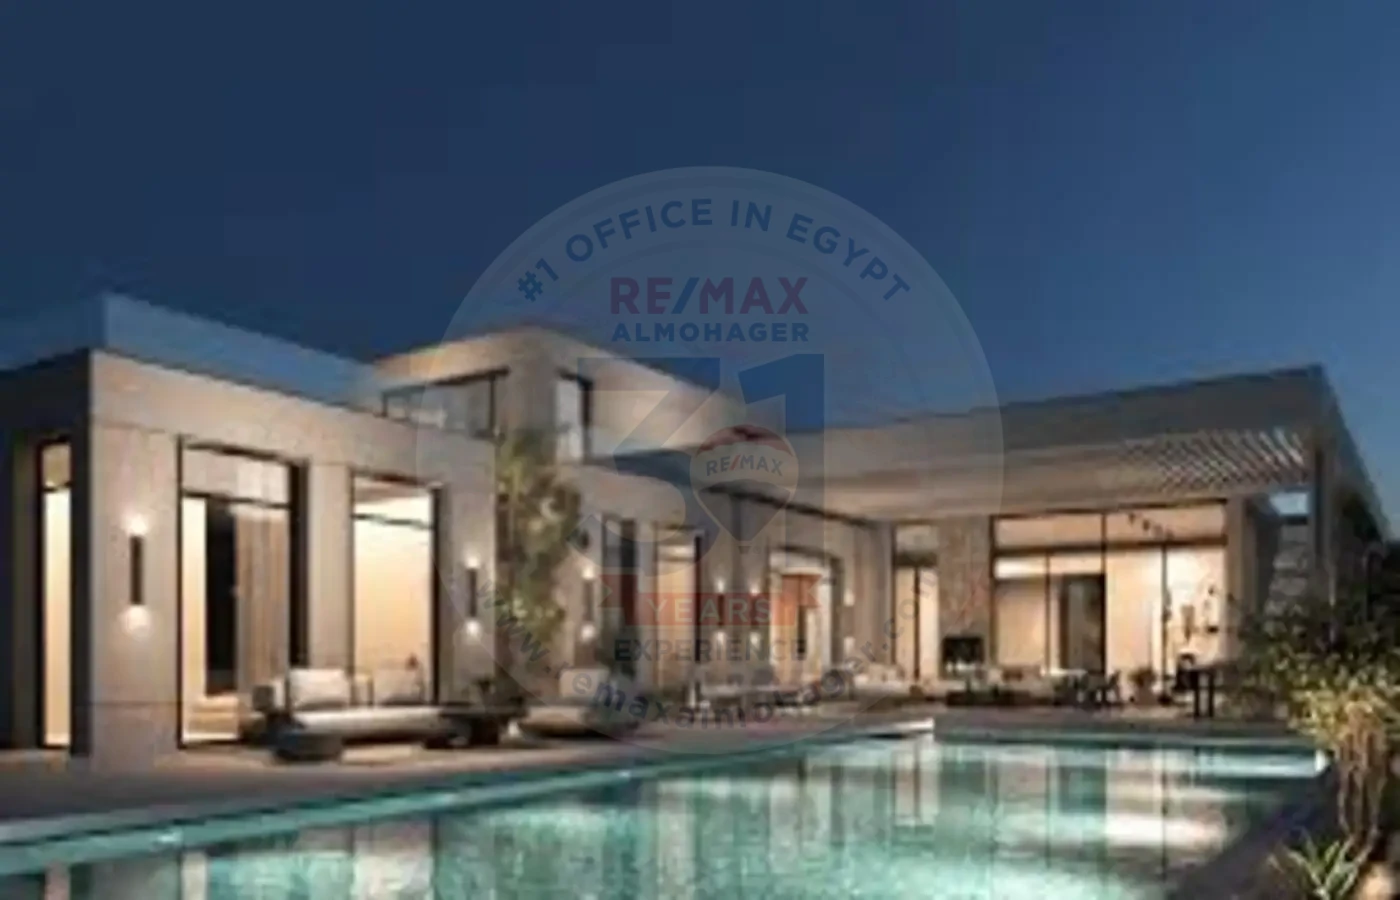 Townhouse for sale in Rivers New Zayed, 180 meters